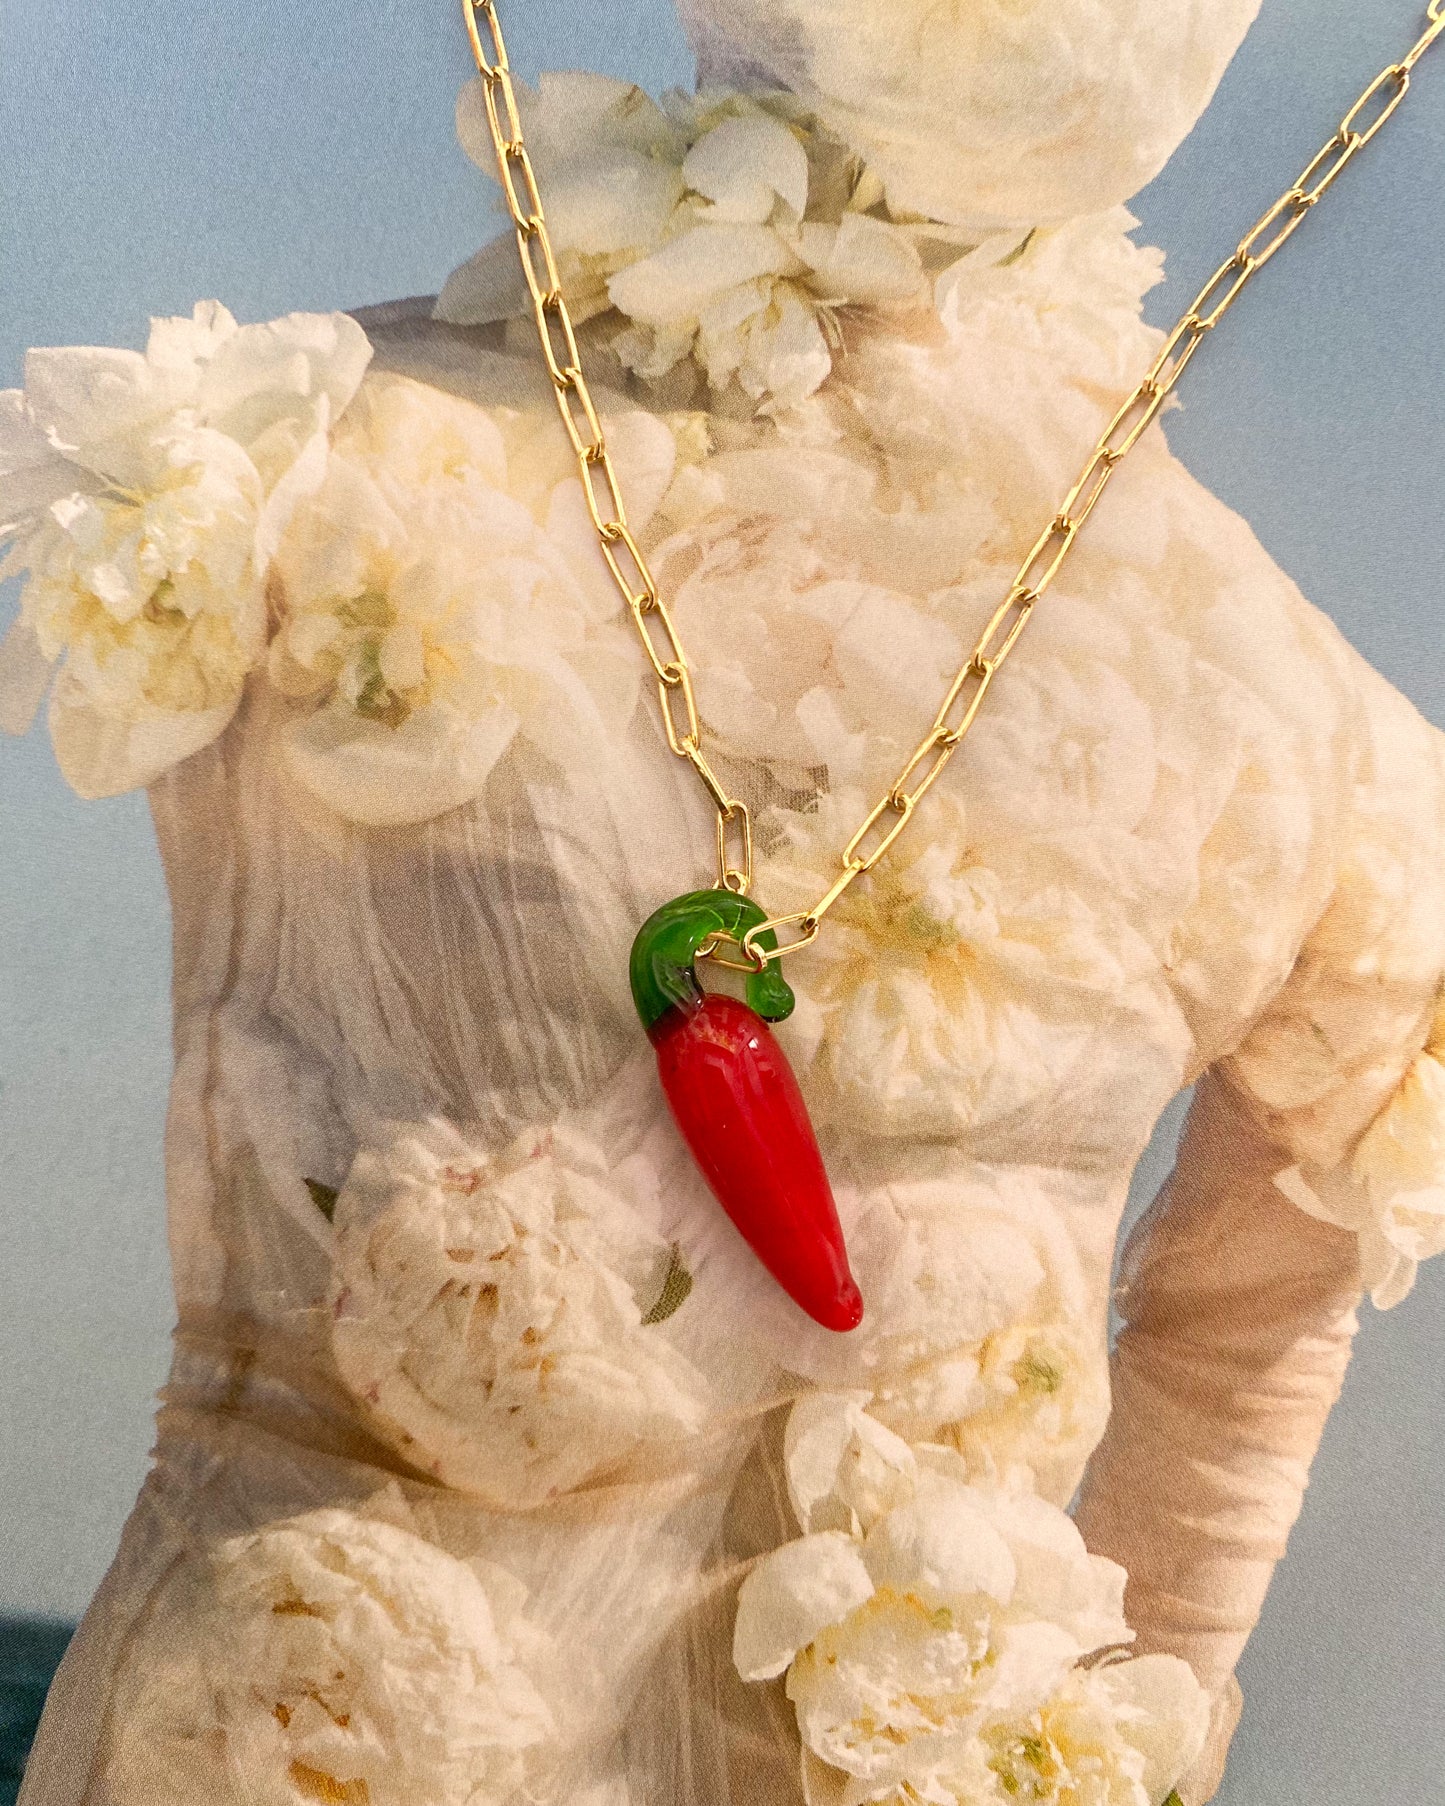 The chili necklace